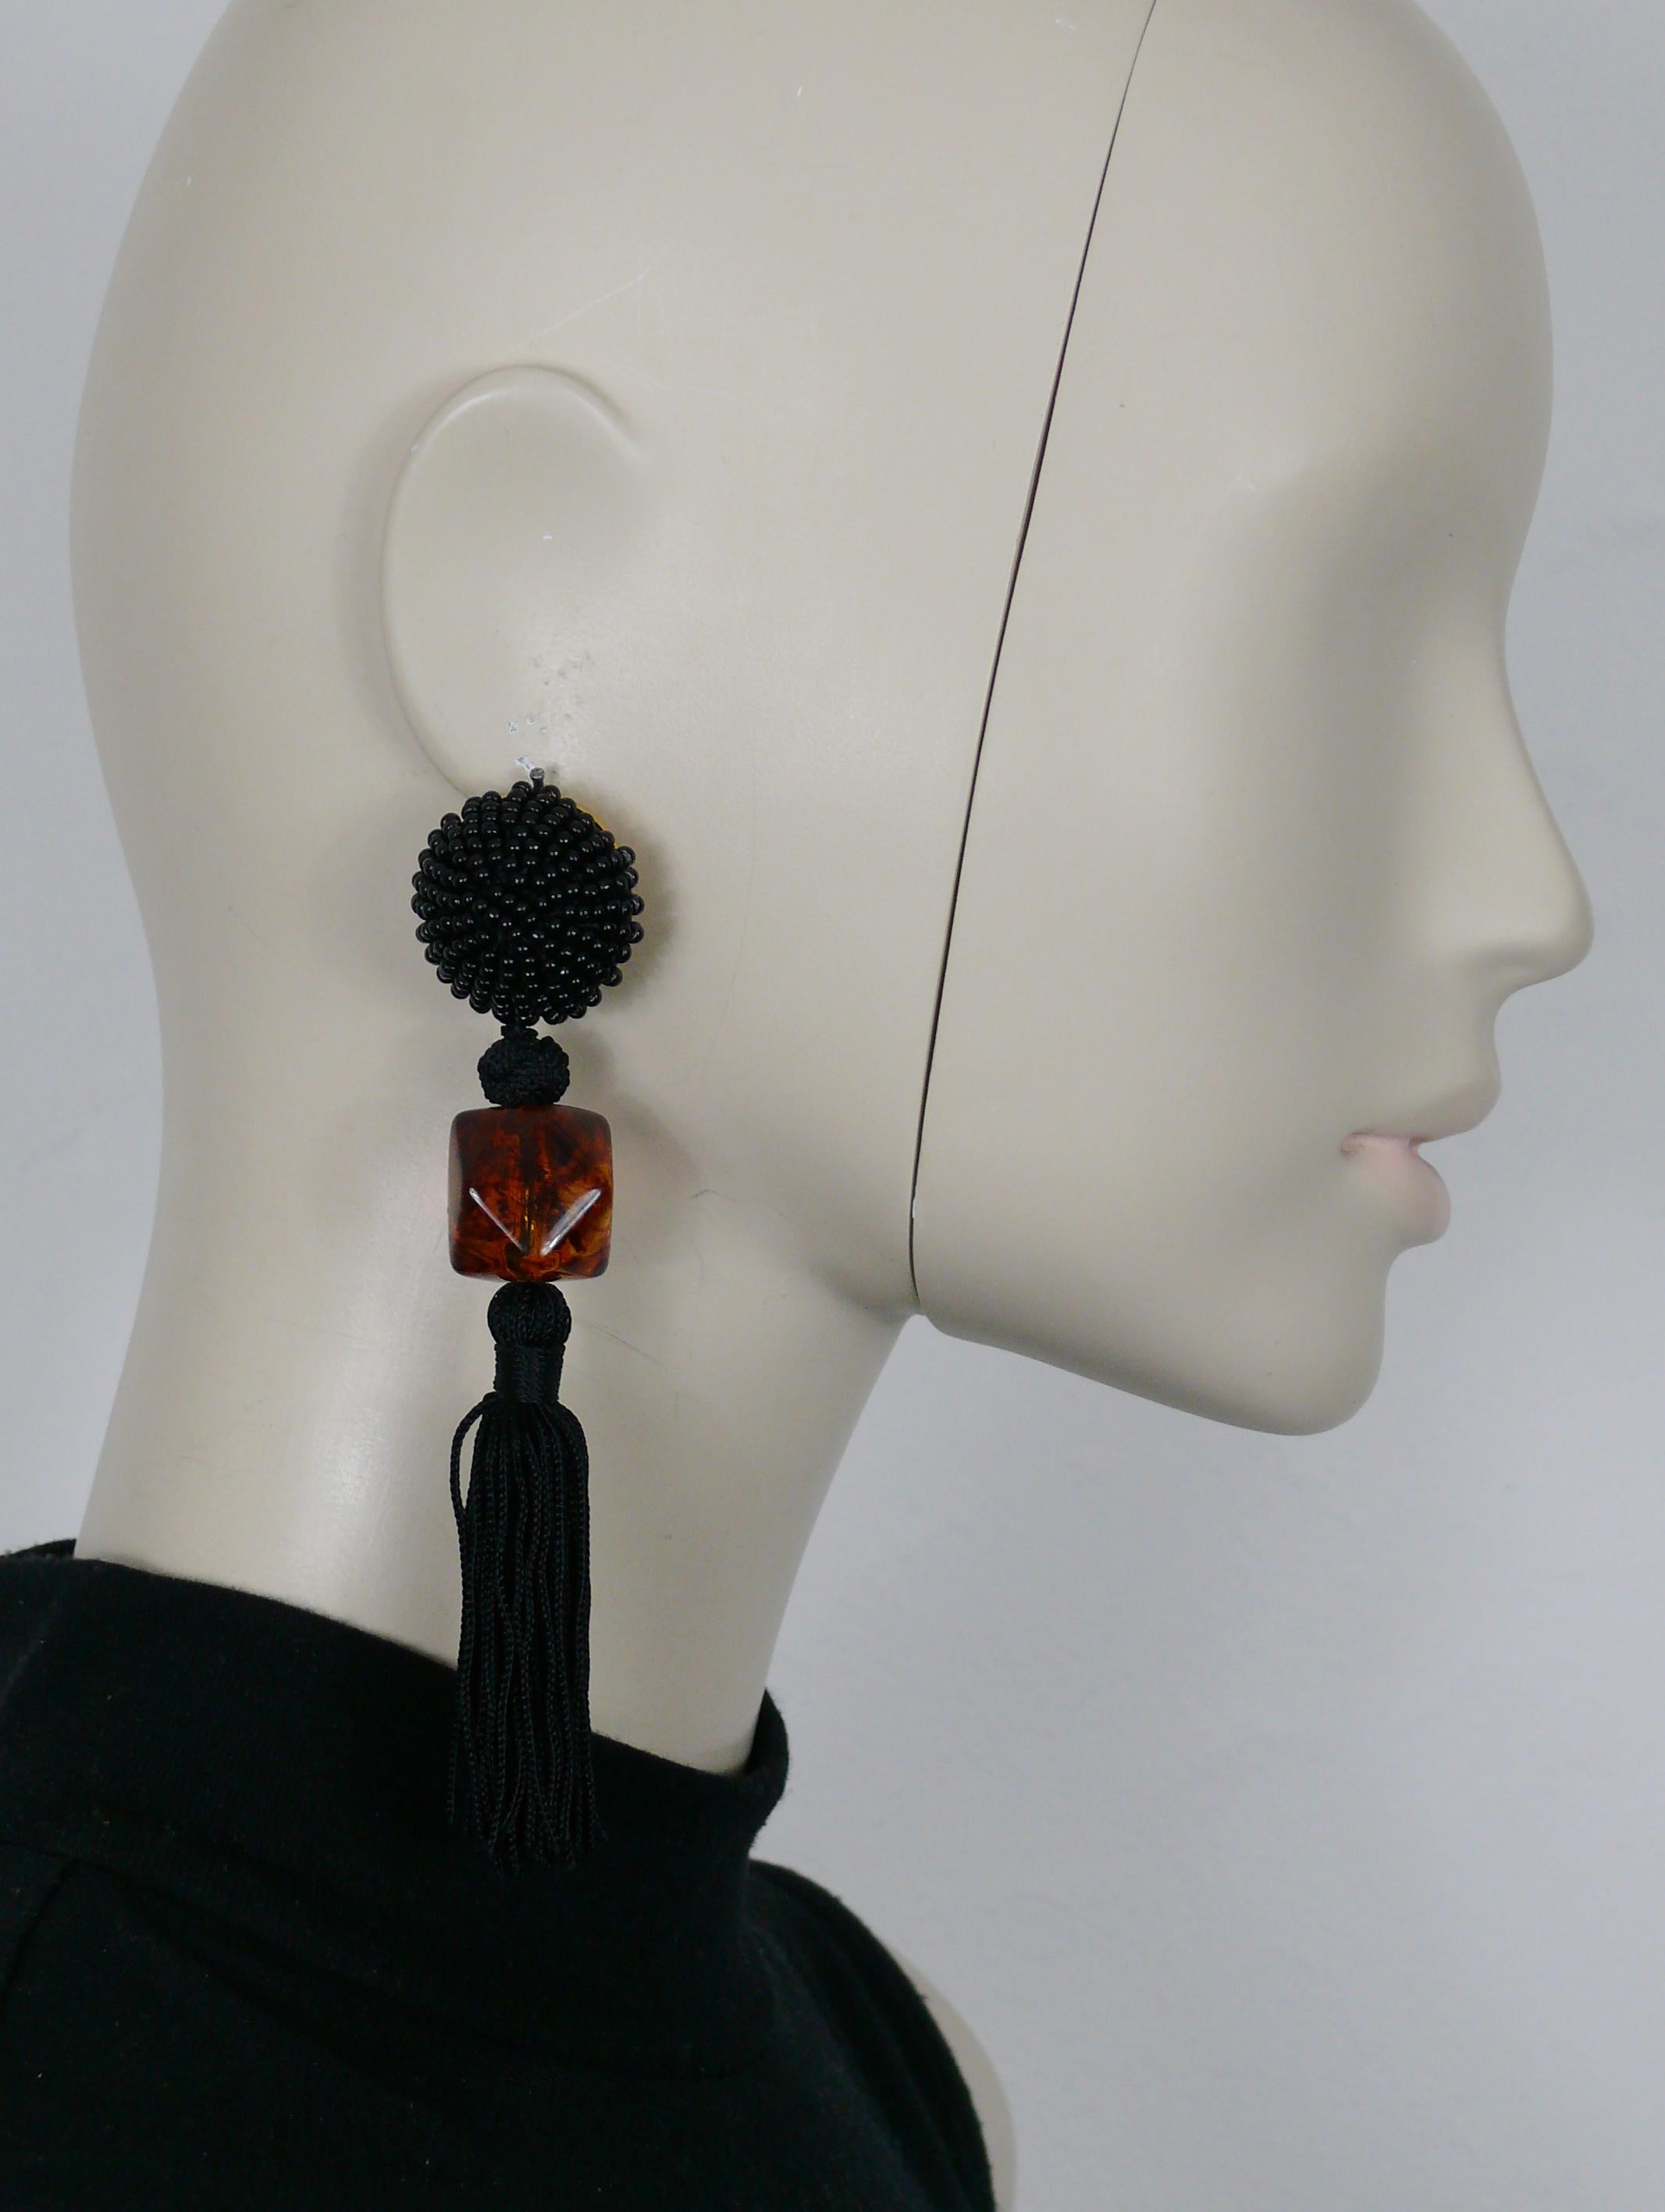 YVES SAINT LAURENT vintage dangling earrings (clip-on) featuring black beaded top, large multifaceted resin bead and black passementerie tassel.

Embossed YSL Made in France.

Indicative measurements : height approx. 12.5 cm (4.92 inches) / max